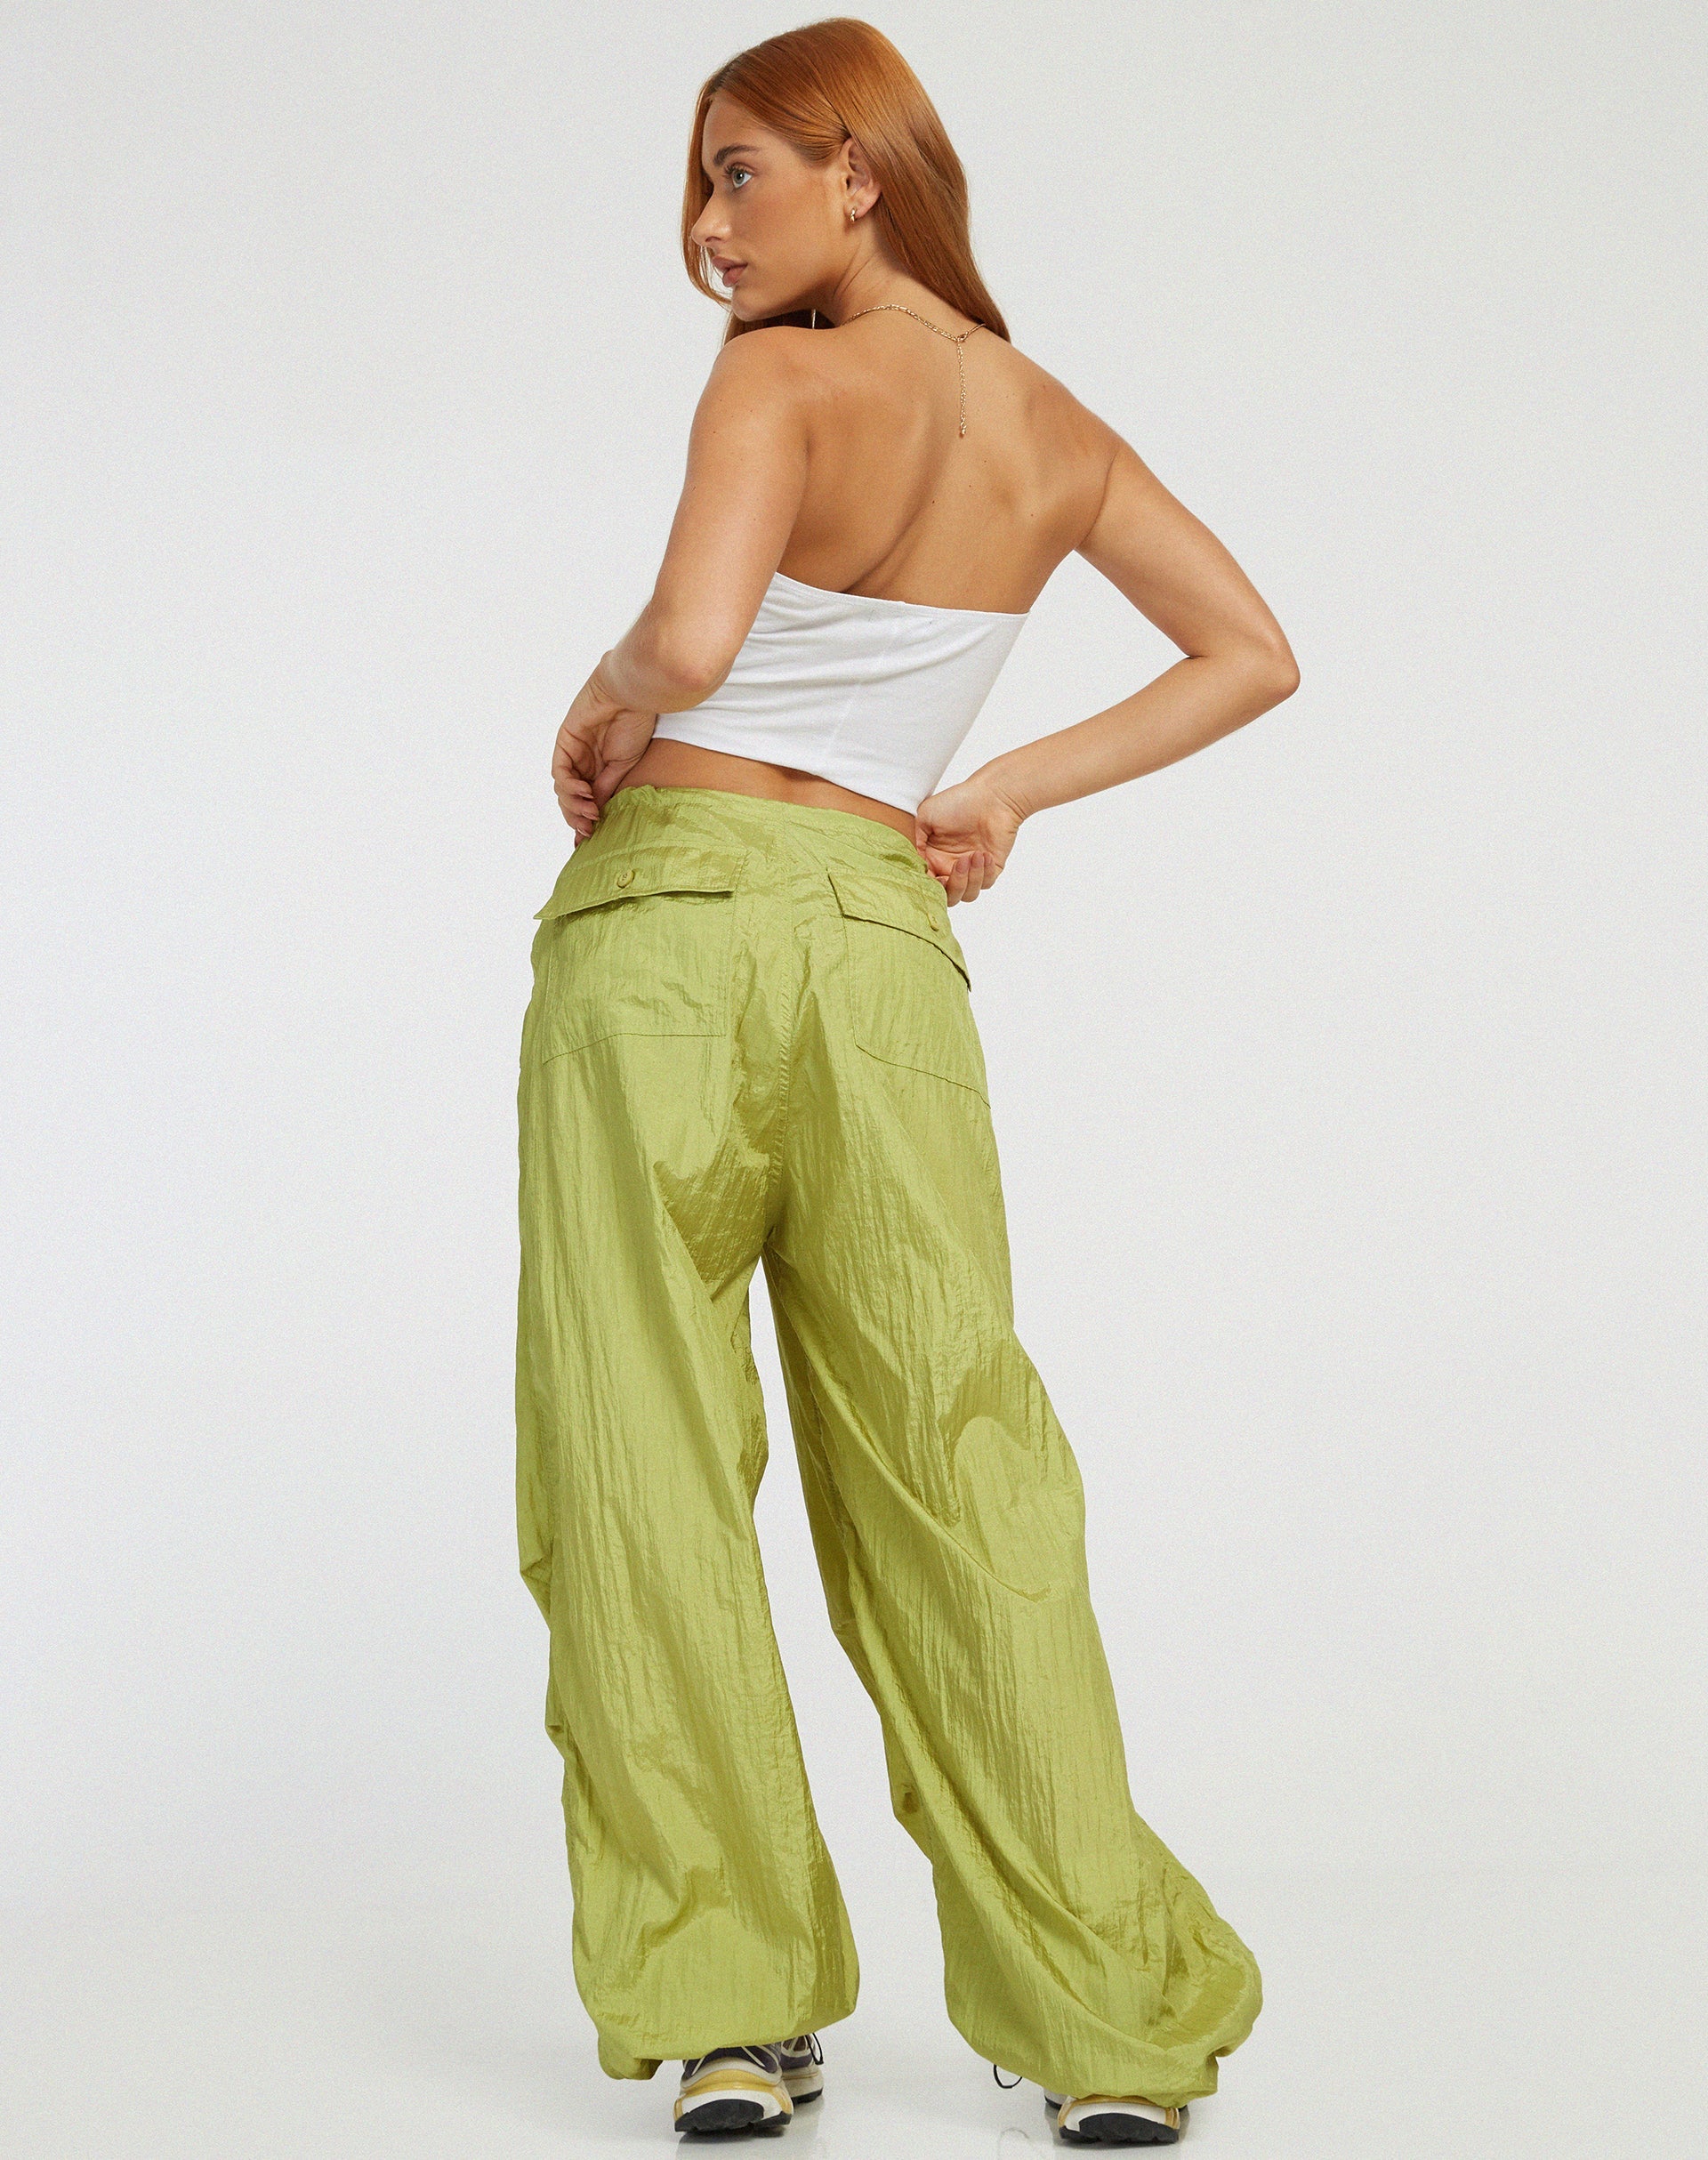 image of Chute Trouser in Pear Green